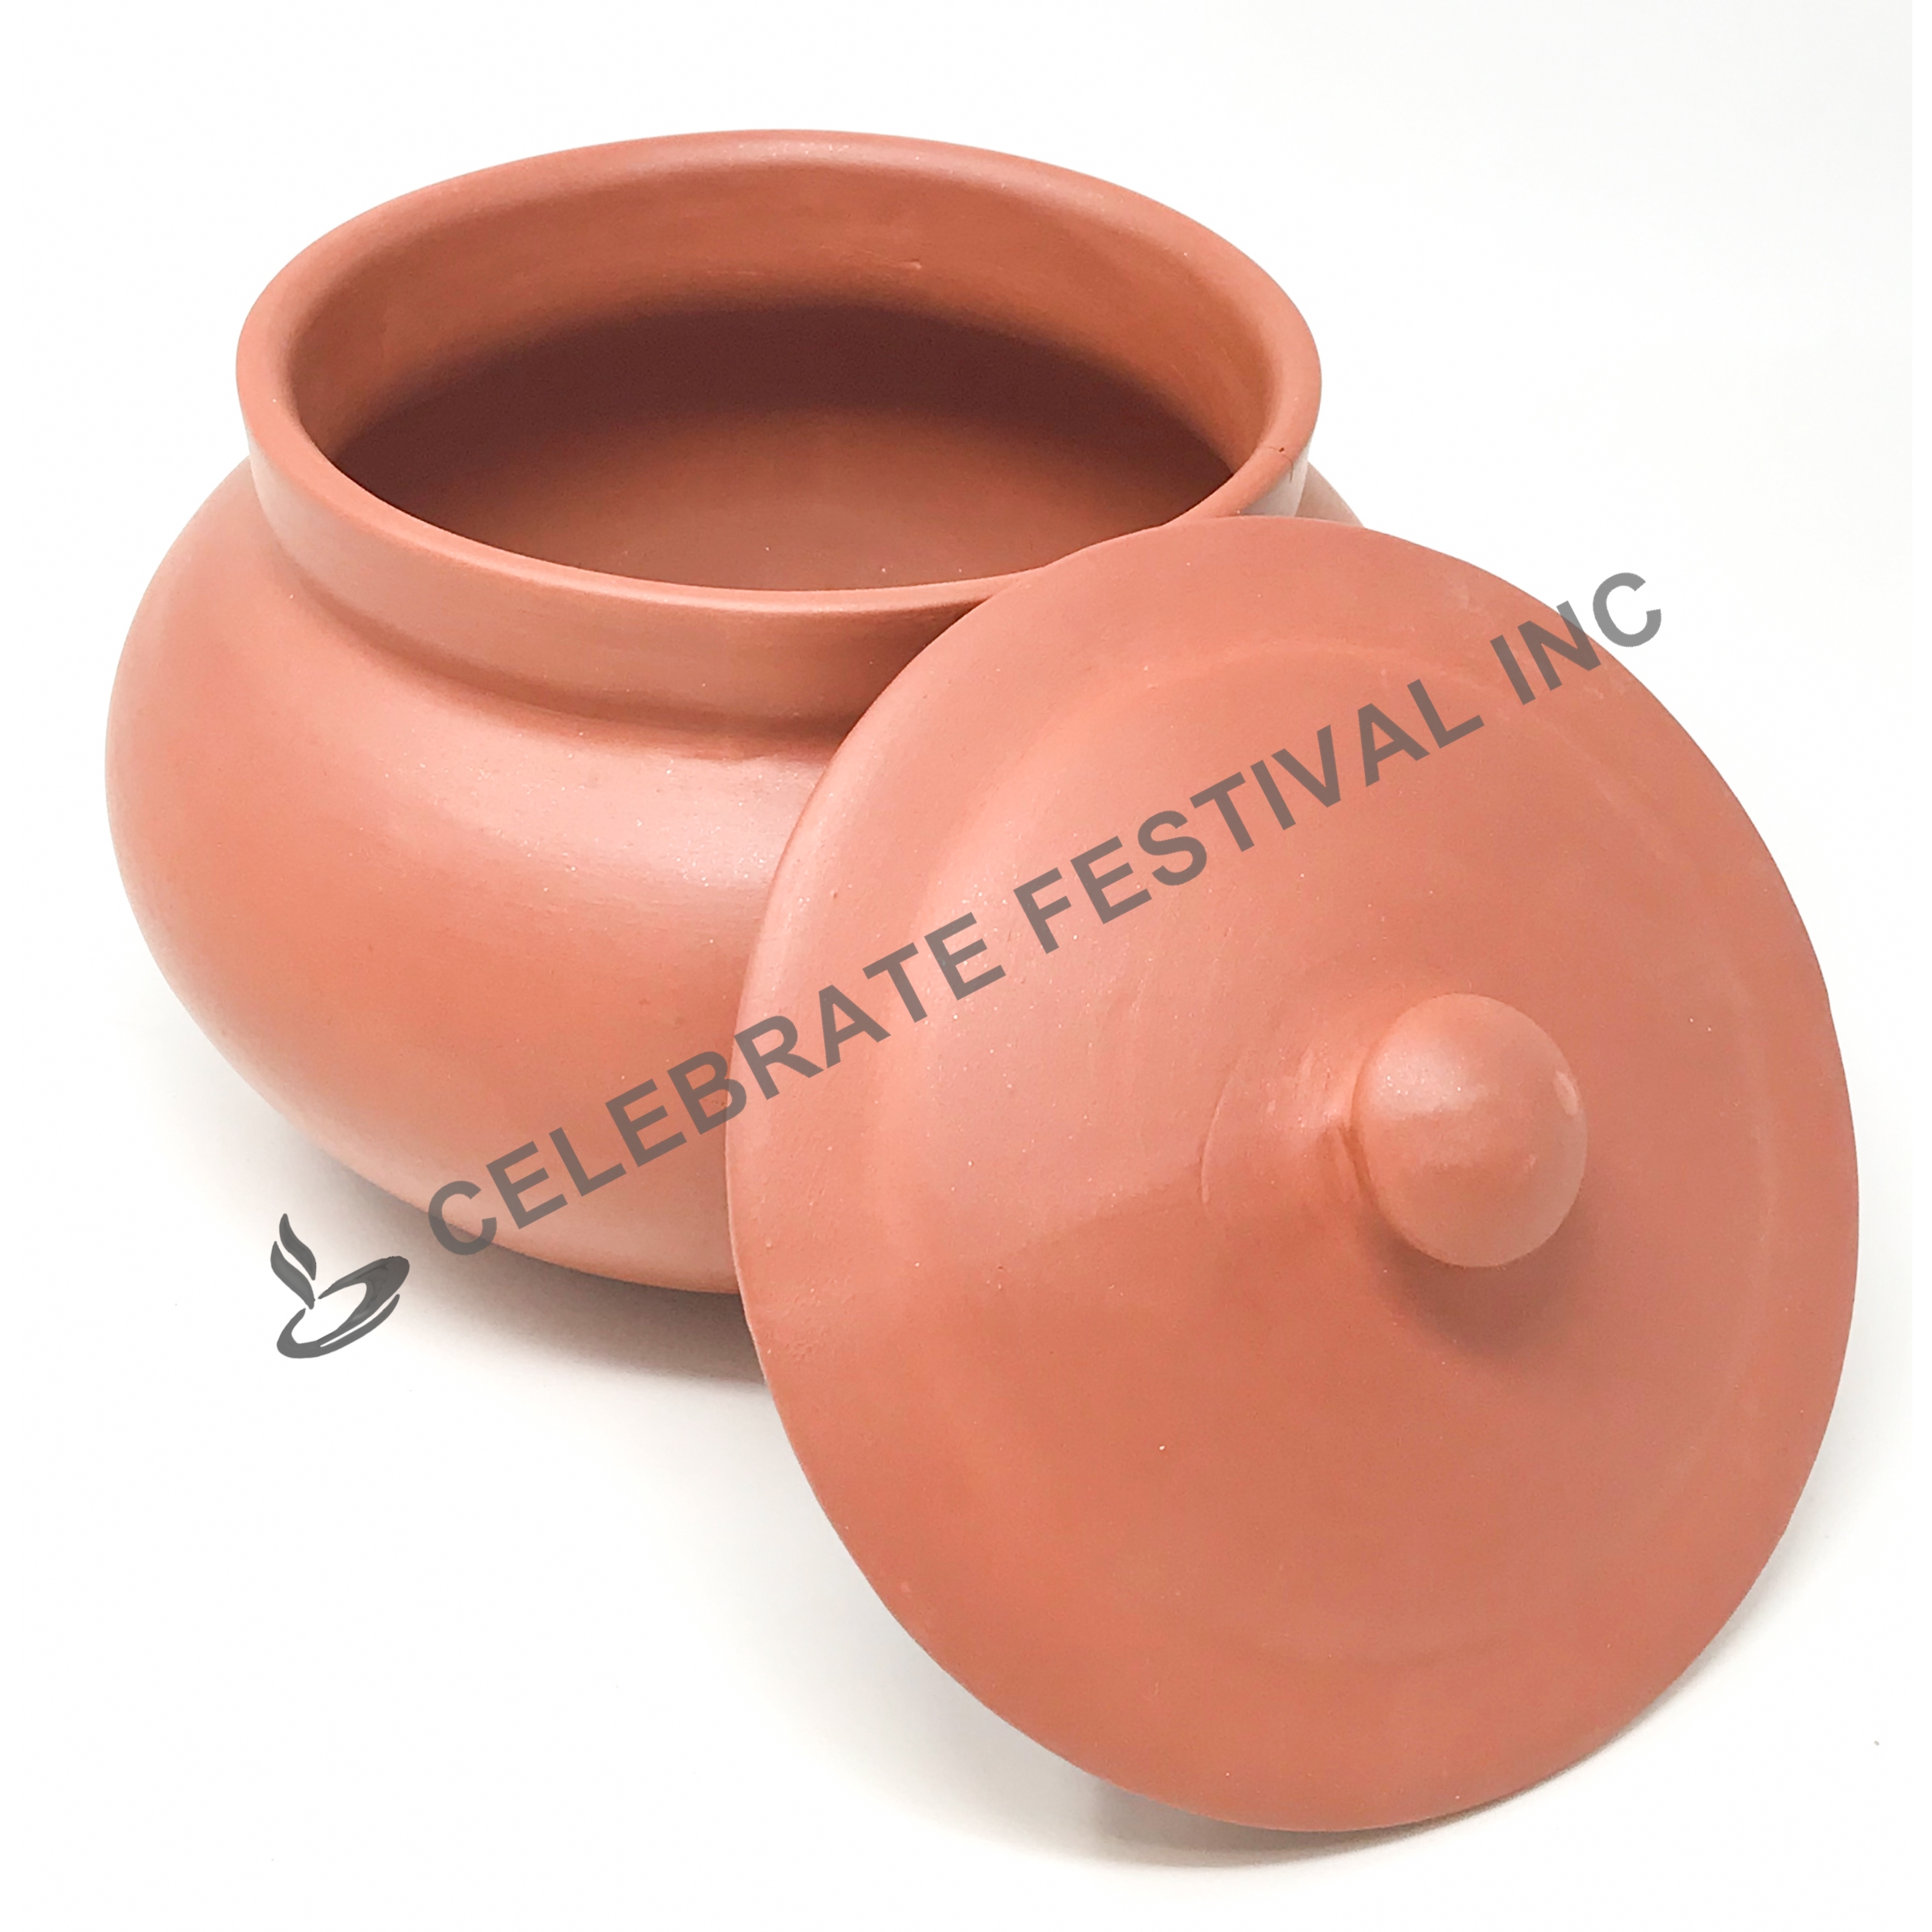 Mitti) Clay Pressure Cooker with Glass Lid (5 Litres)